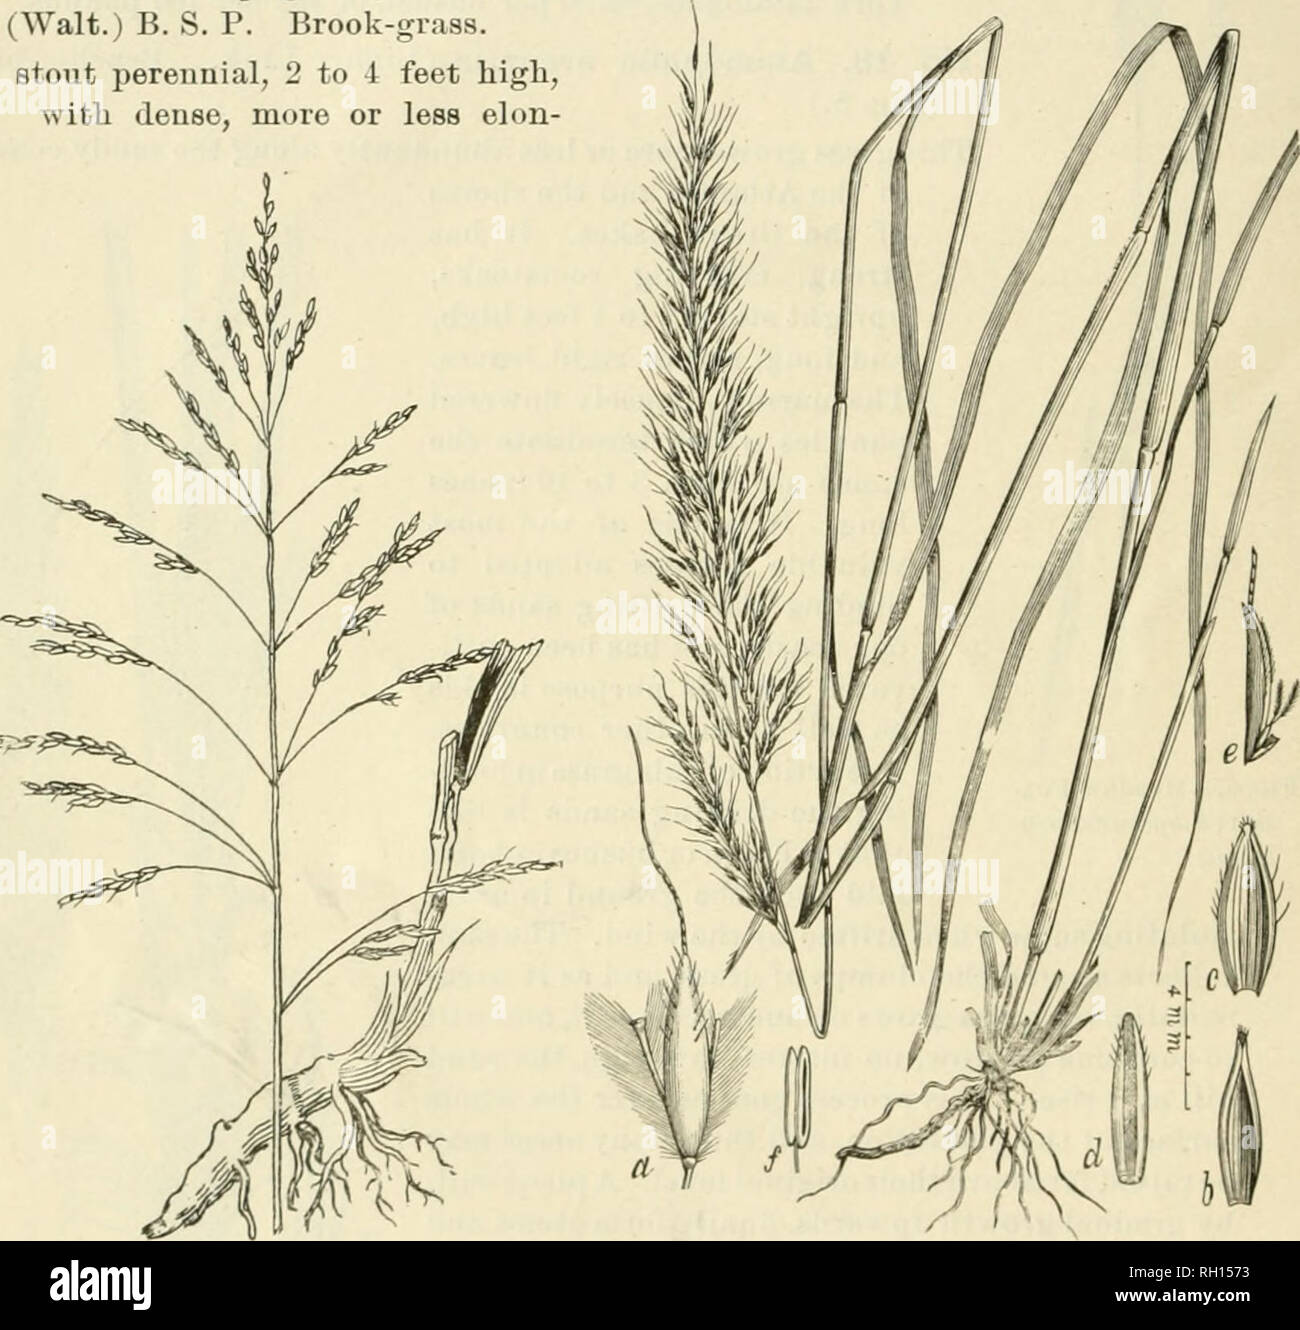 . Bulletin. Gramineae -- United States; Forage plants -- United States. 12 No. 19. Andropogon contortus Linn. Twisted Beard-grass. A stout, leafy perennial, 1 to 3 feet high, aftording excellent grazing when young, but the mature seeds are much dreaded by sheep owners, as by their peculiar structure tbey not only become attached to and injure the wool, but ofteu pene- trate the skin and even the intestines of these animals. The strong rhizomes and tough fibrous roots which this grass has, commend it as a soil binder for river lianks, dams, etc. The awns indicate by their twisting the amount of Stock Photo